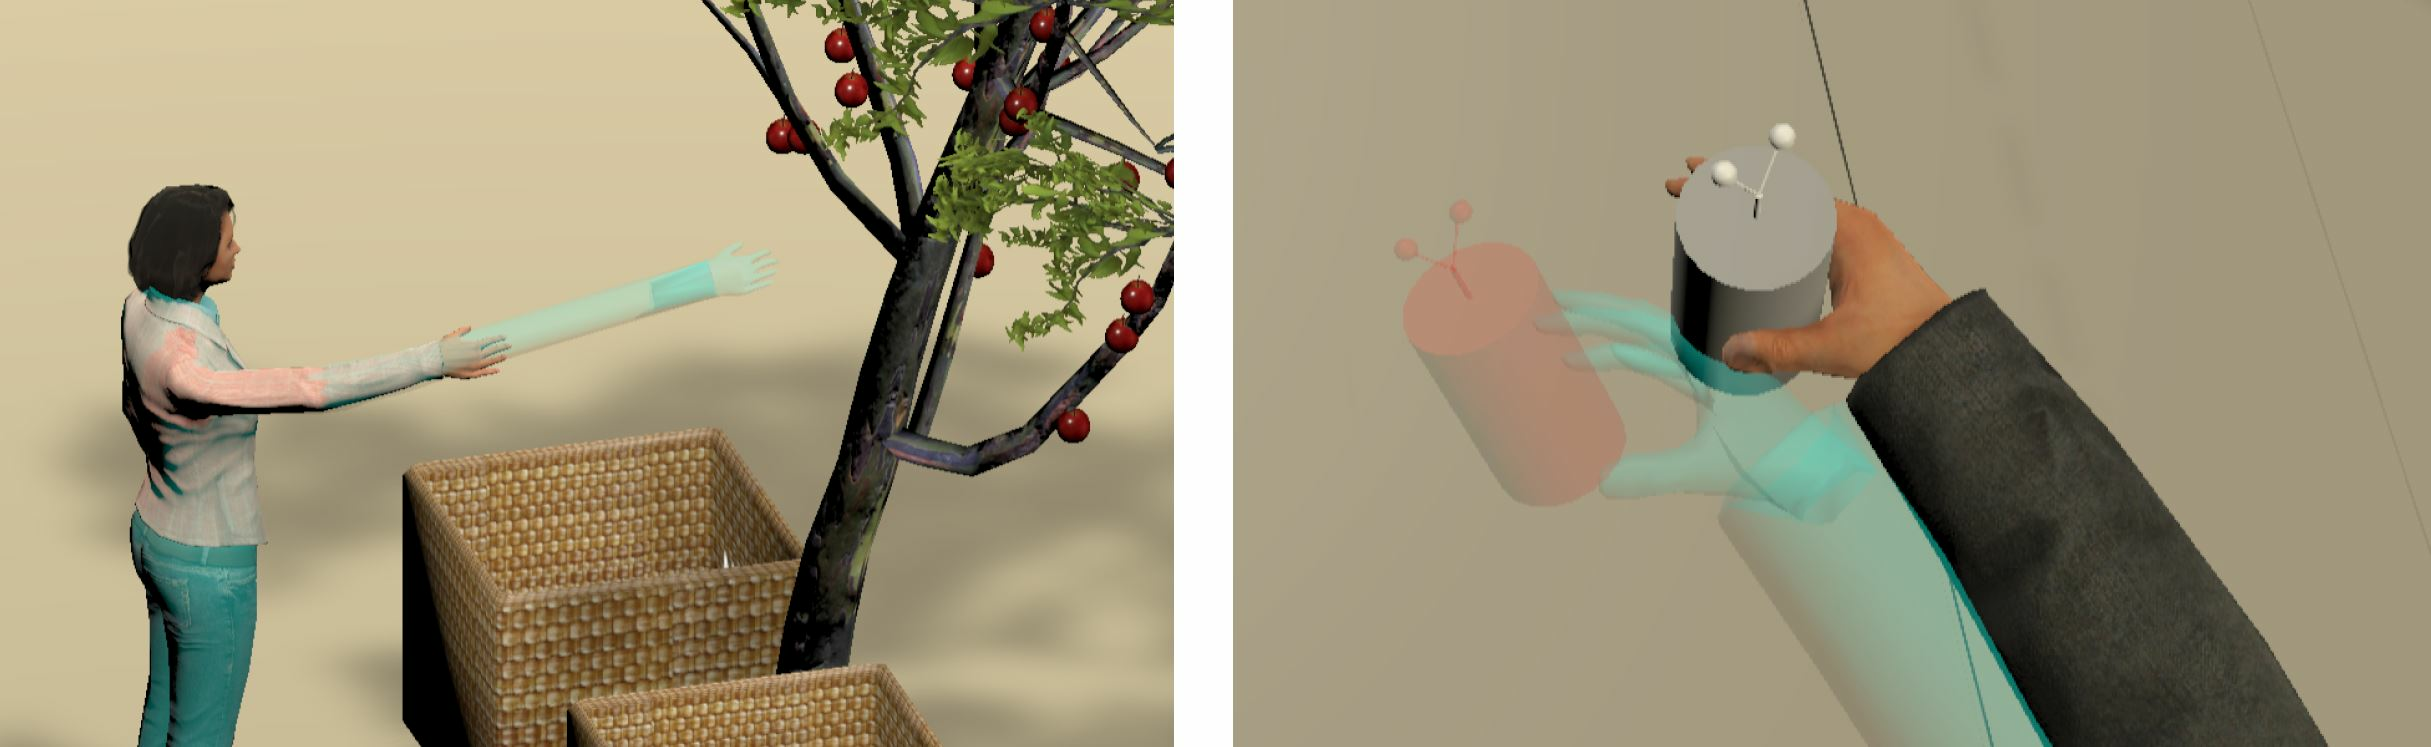 Illustration of two types of dual body representation studied in this paper. On the left image, a ghost representation enables remote manipulation while a realistic co-located representation provides feedback with respect to the real user’s position. On the right image, a ghost representation provides feedback with respect to the user’s real position while a realistic representation enables precise manipulation with the environment thanks to slowed motion.